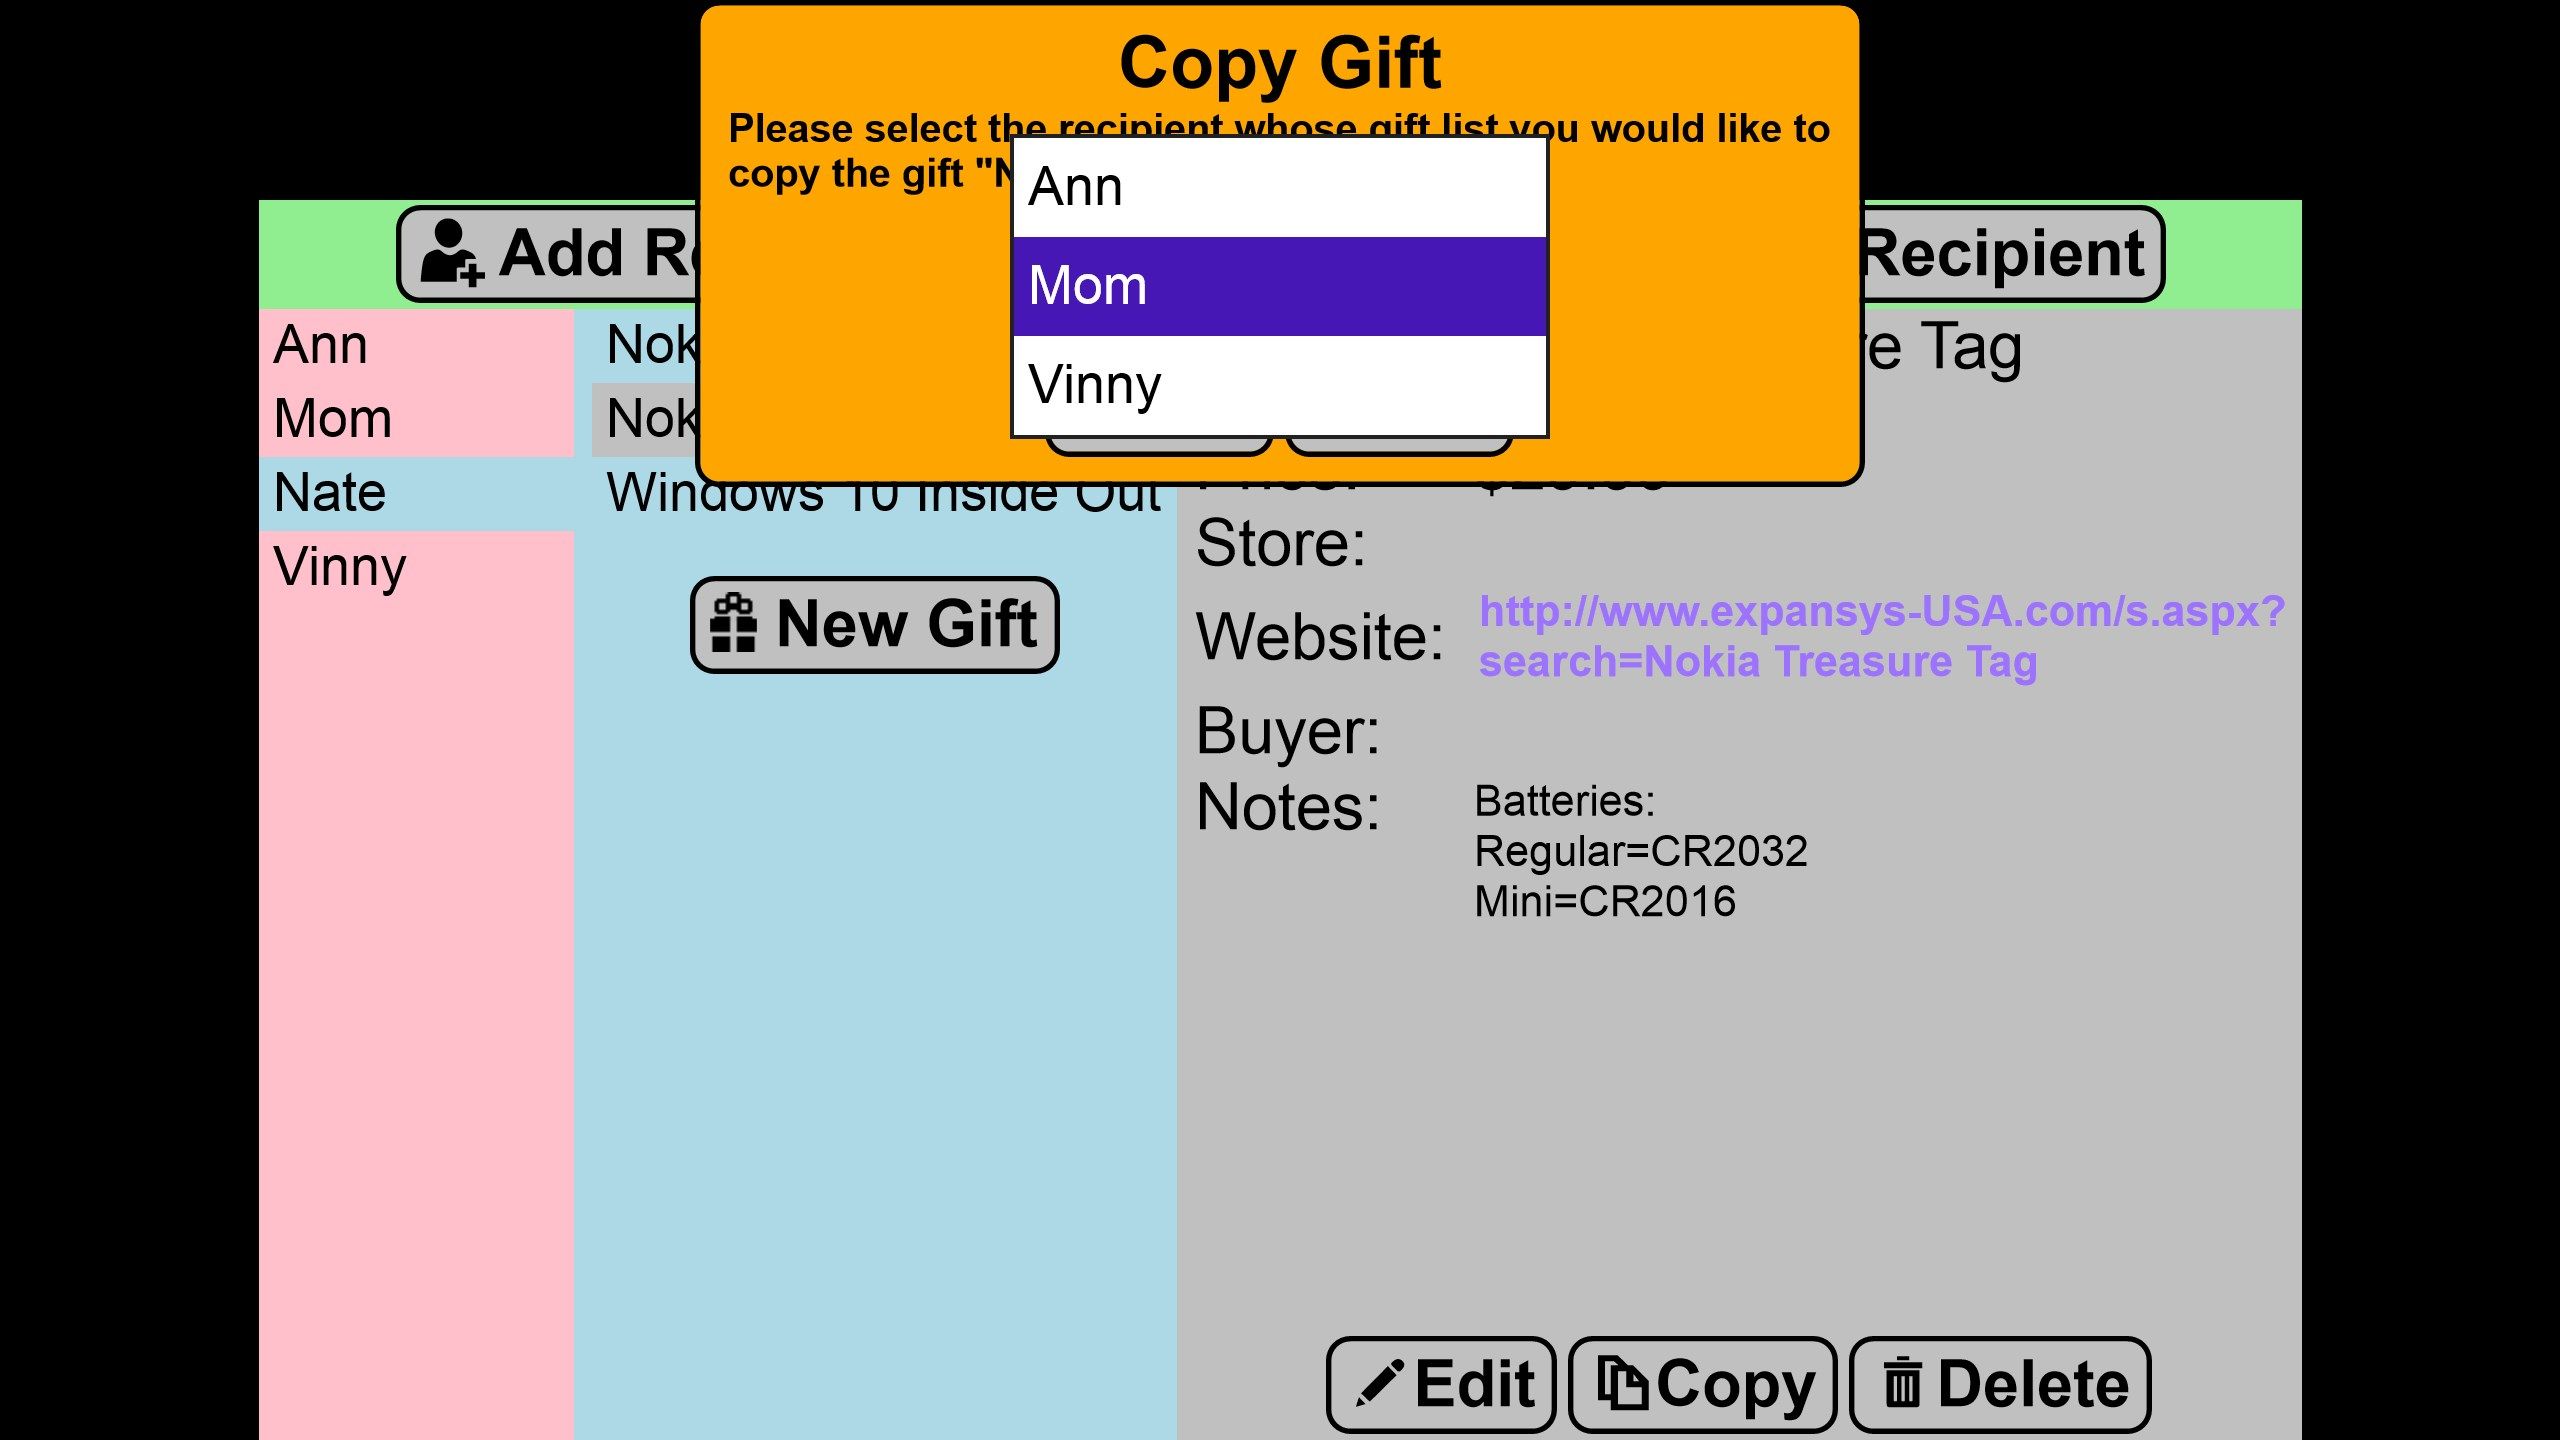 Gifts can be copied to another recipient's list